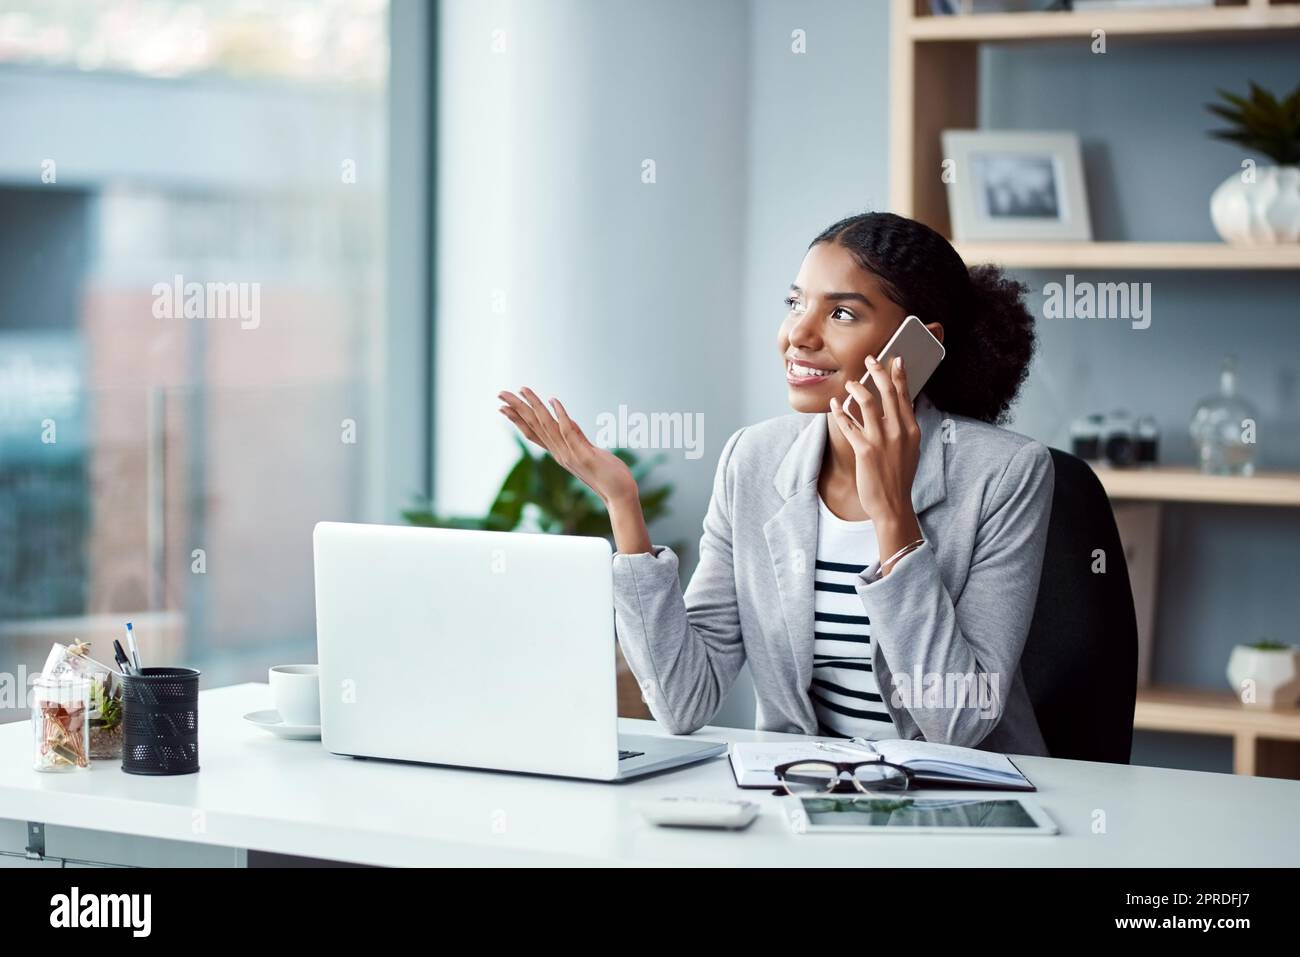 Young business woman on a phone call talking and planning while sitting alone at a desk on a office computer. Female worker discussing work on her smartphone. An employee embracing modern technology Stock Photo